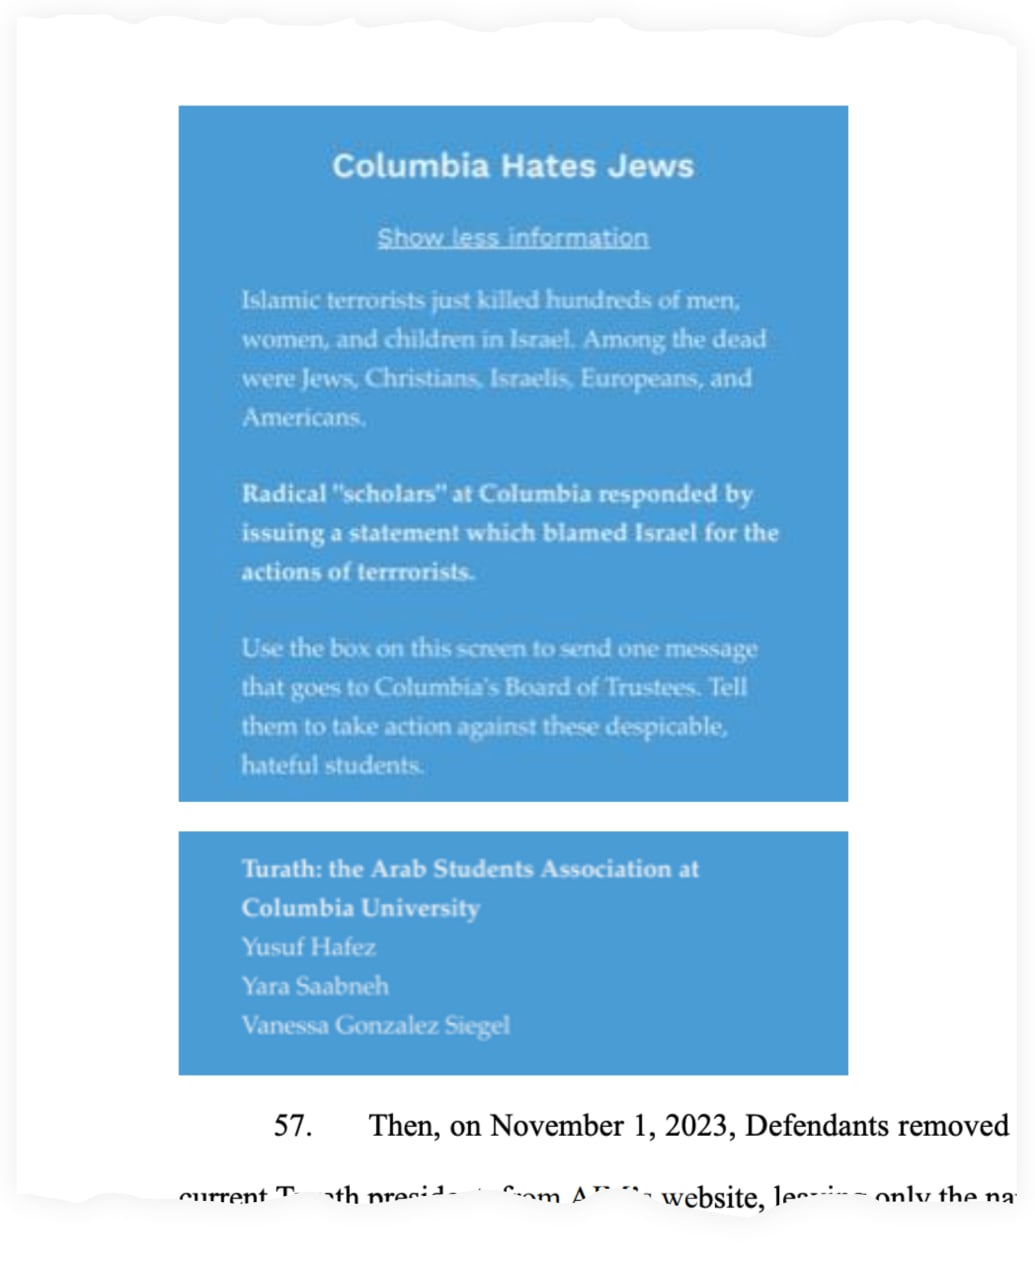 A snippet from Yusuf Hafez’s lawsuit, which shows a screenshot of AIM’s website and the accompanying headline, “Columbia Hates Jews.”